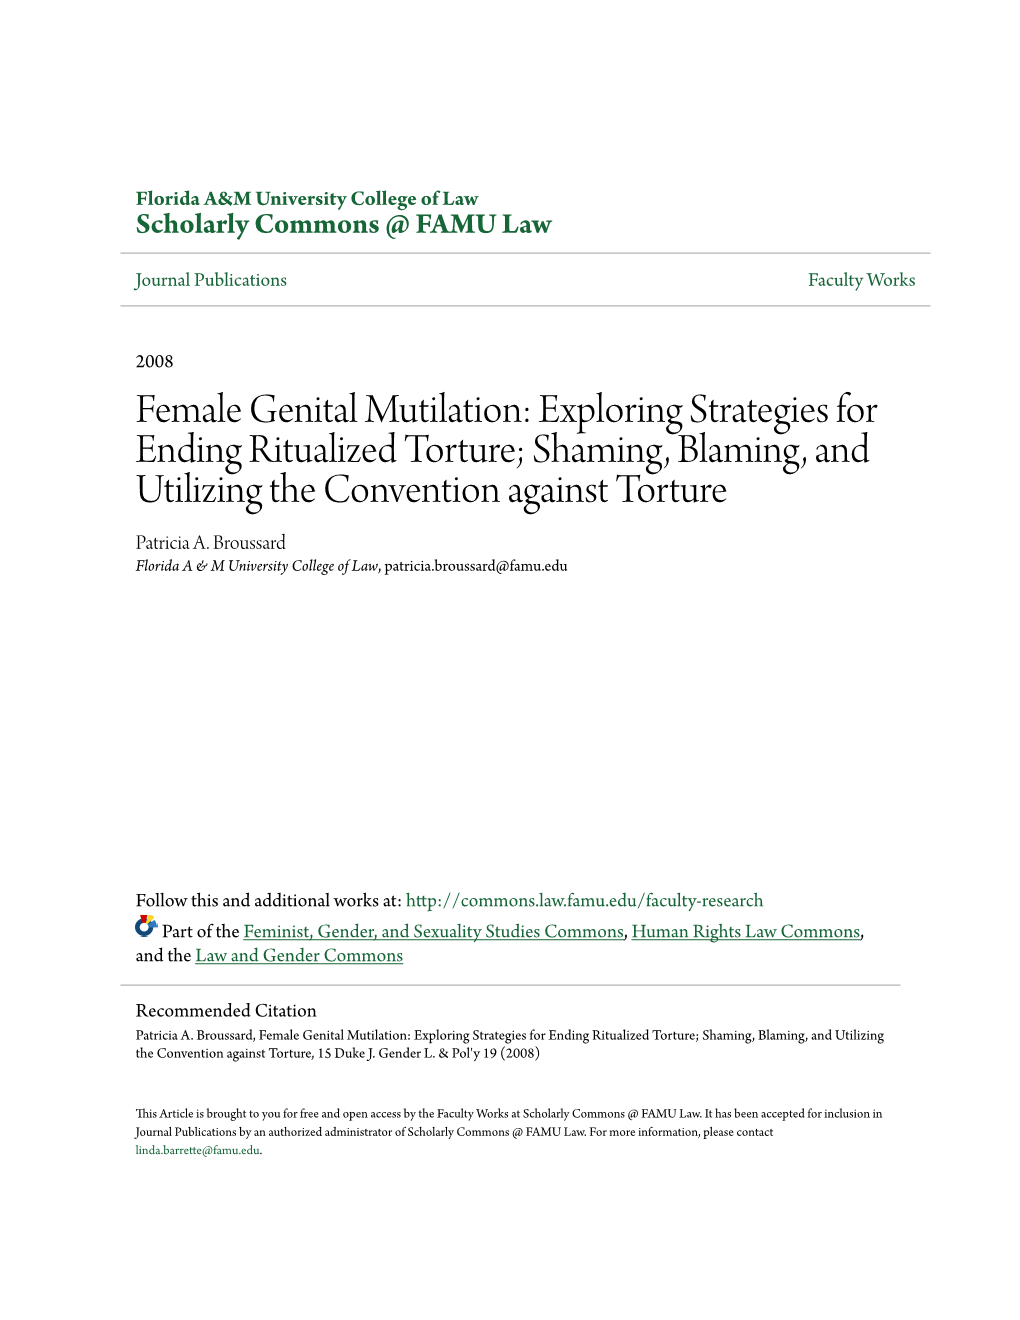 Female Genital Mutilation: Exploring Strategies for Ending Ritualized Torture; Shaming, Blaming, and Utilizing the Convention Against Torture Patricia A